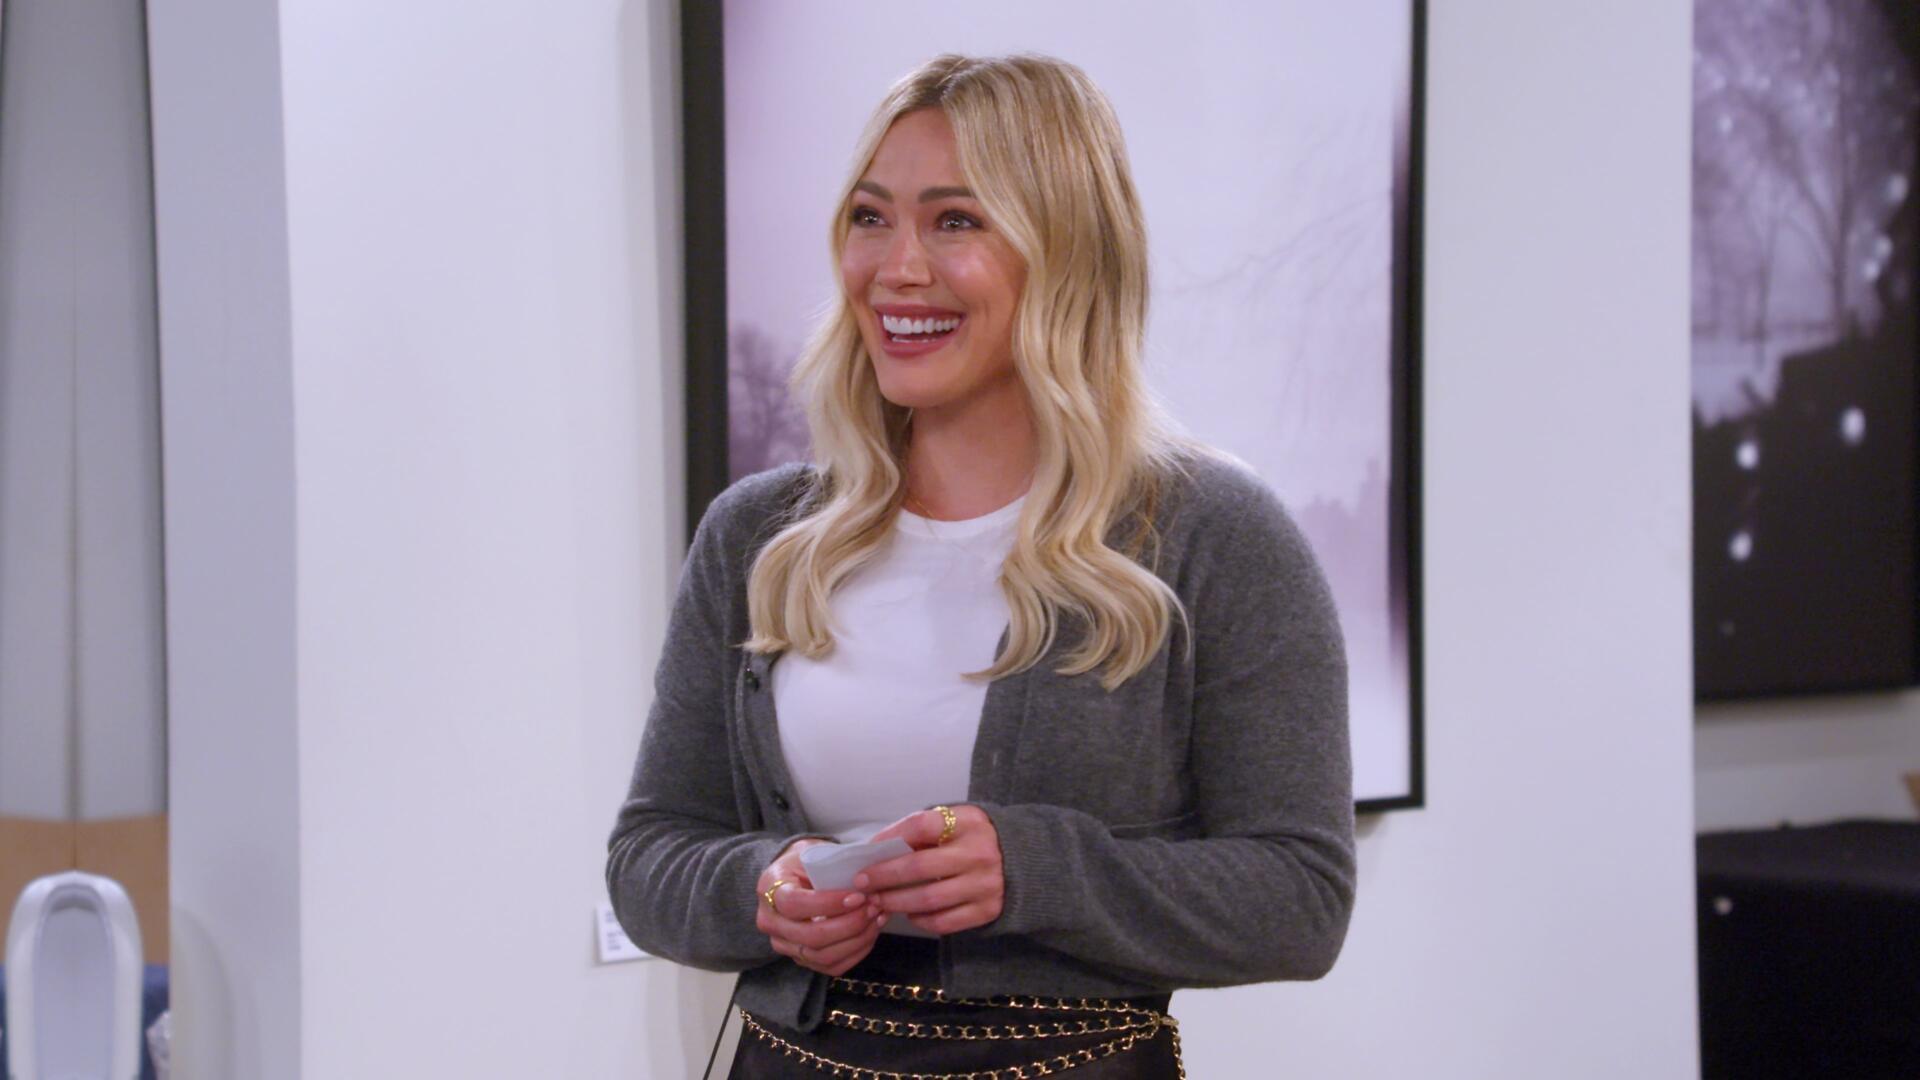 Hilary Duff – How I Met Your Father | Season 2 Episode 3